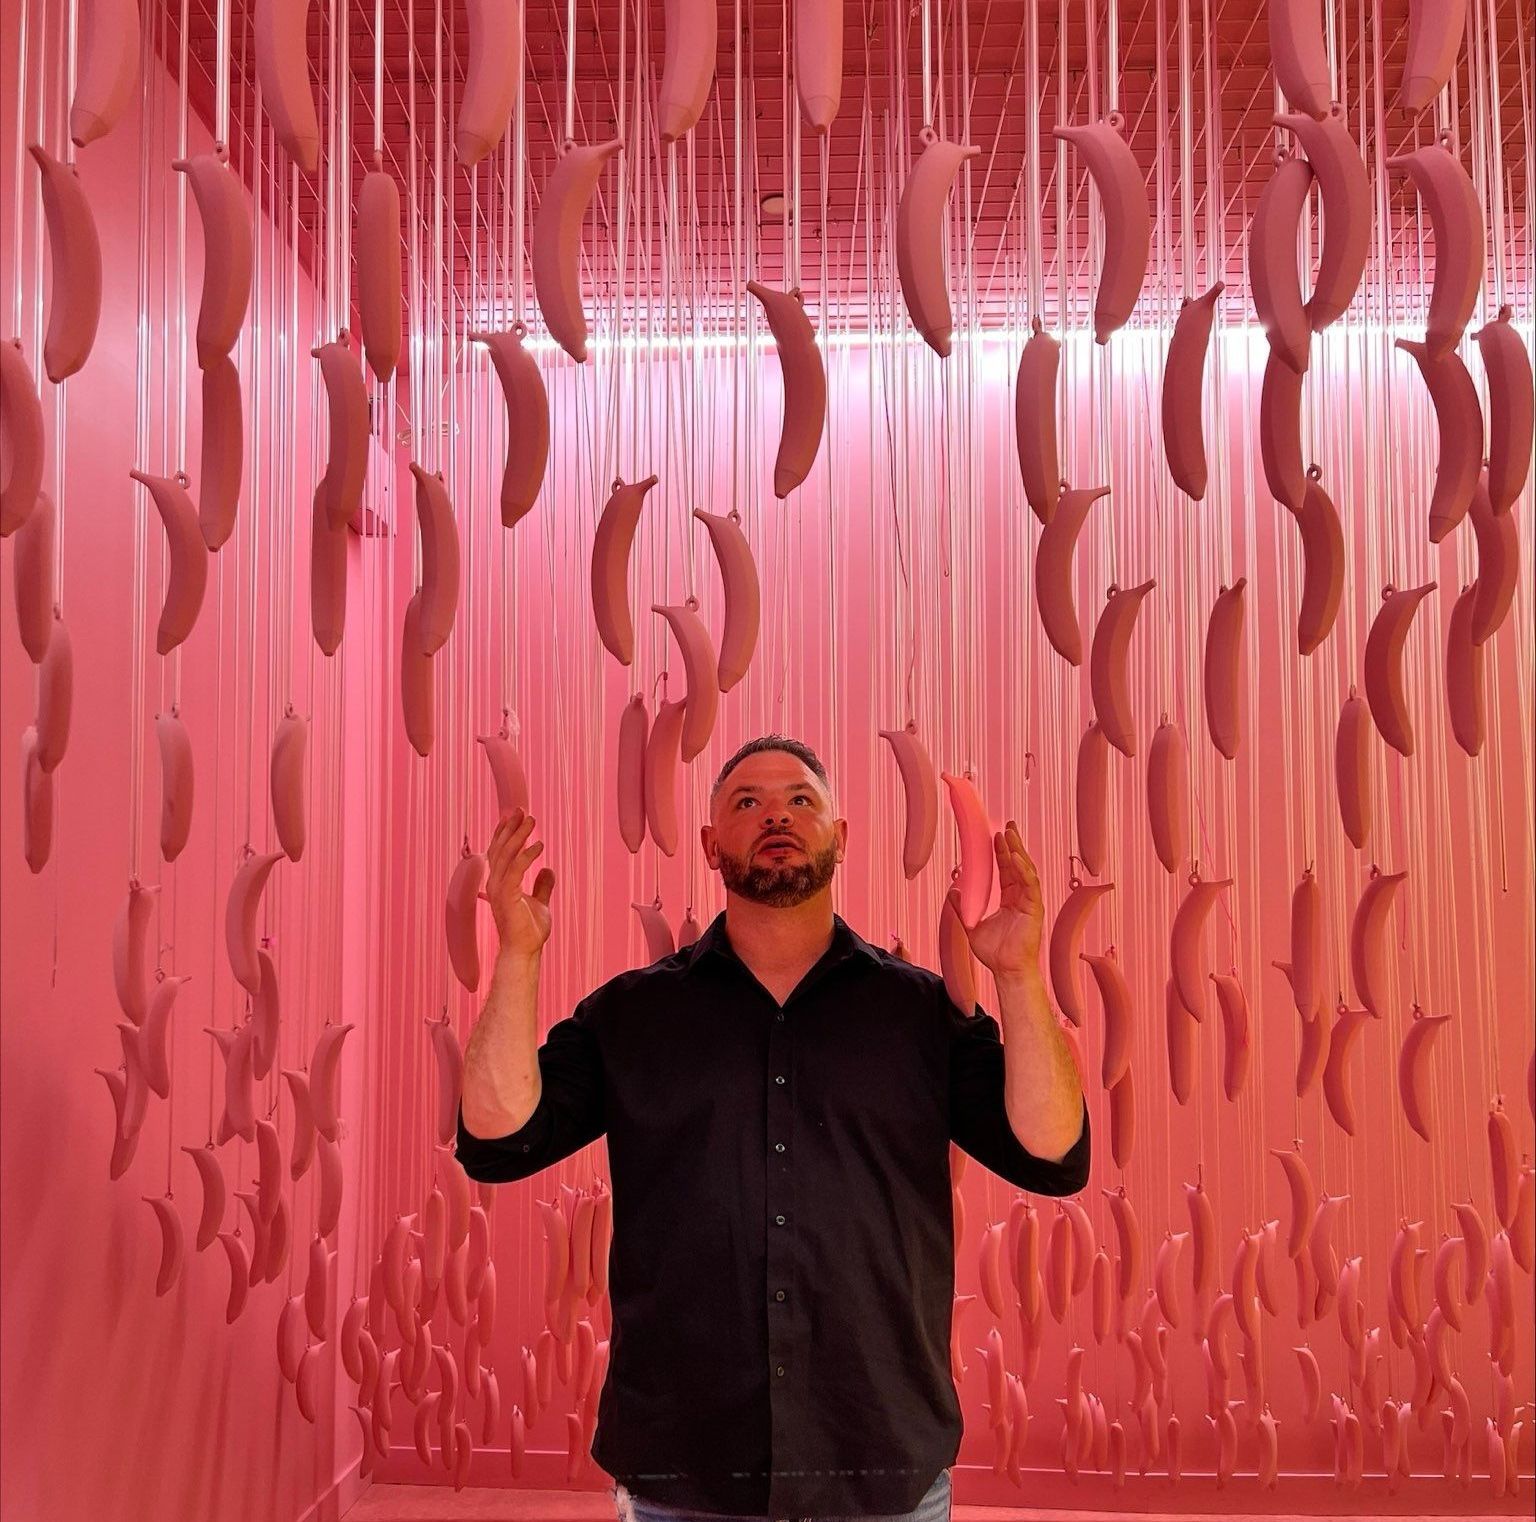 a man is standing in front of a pink wall with bananas hanging from the ceiling .